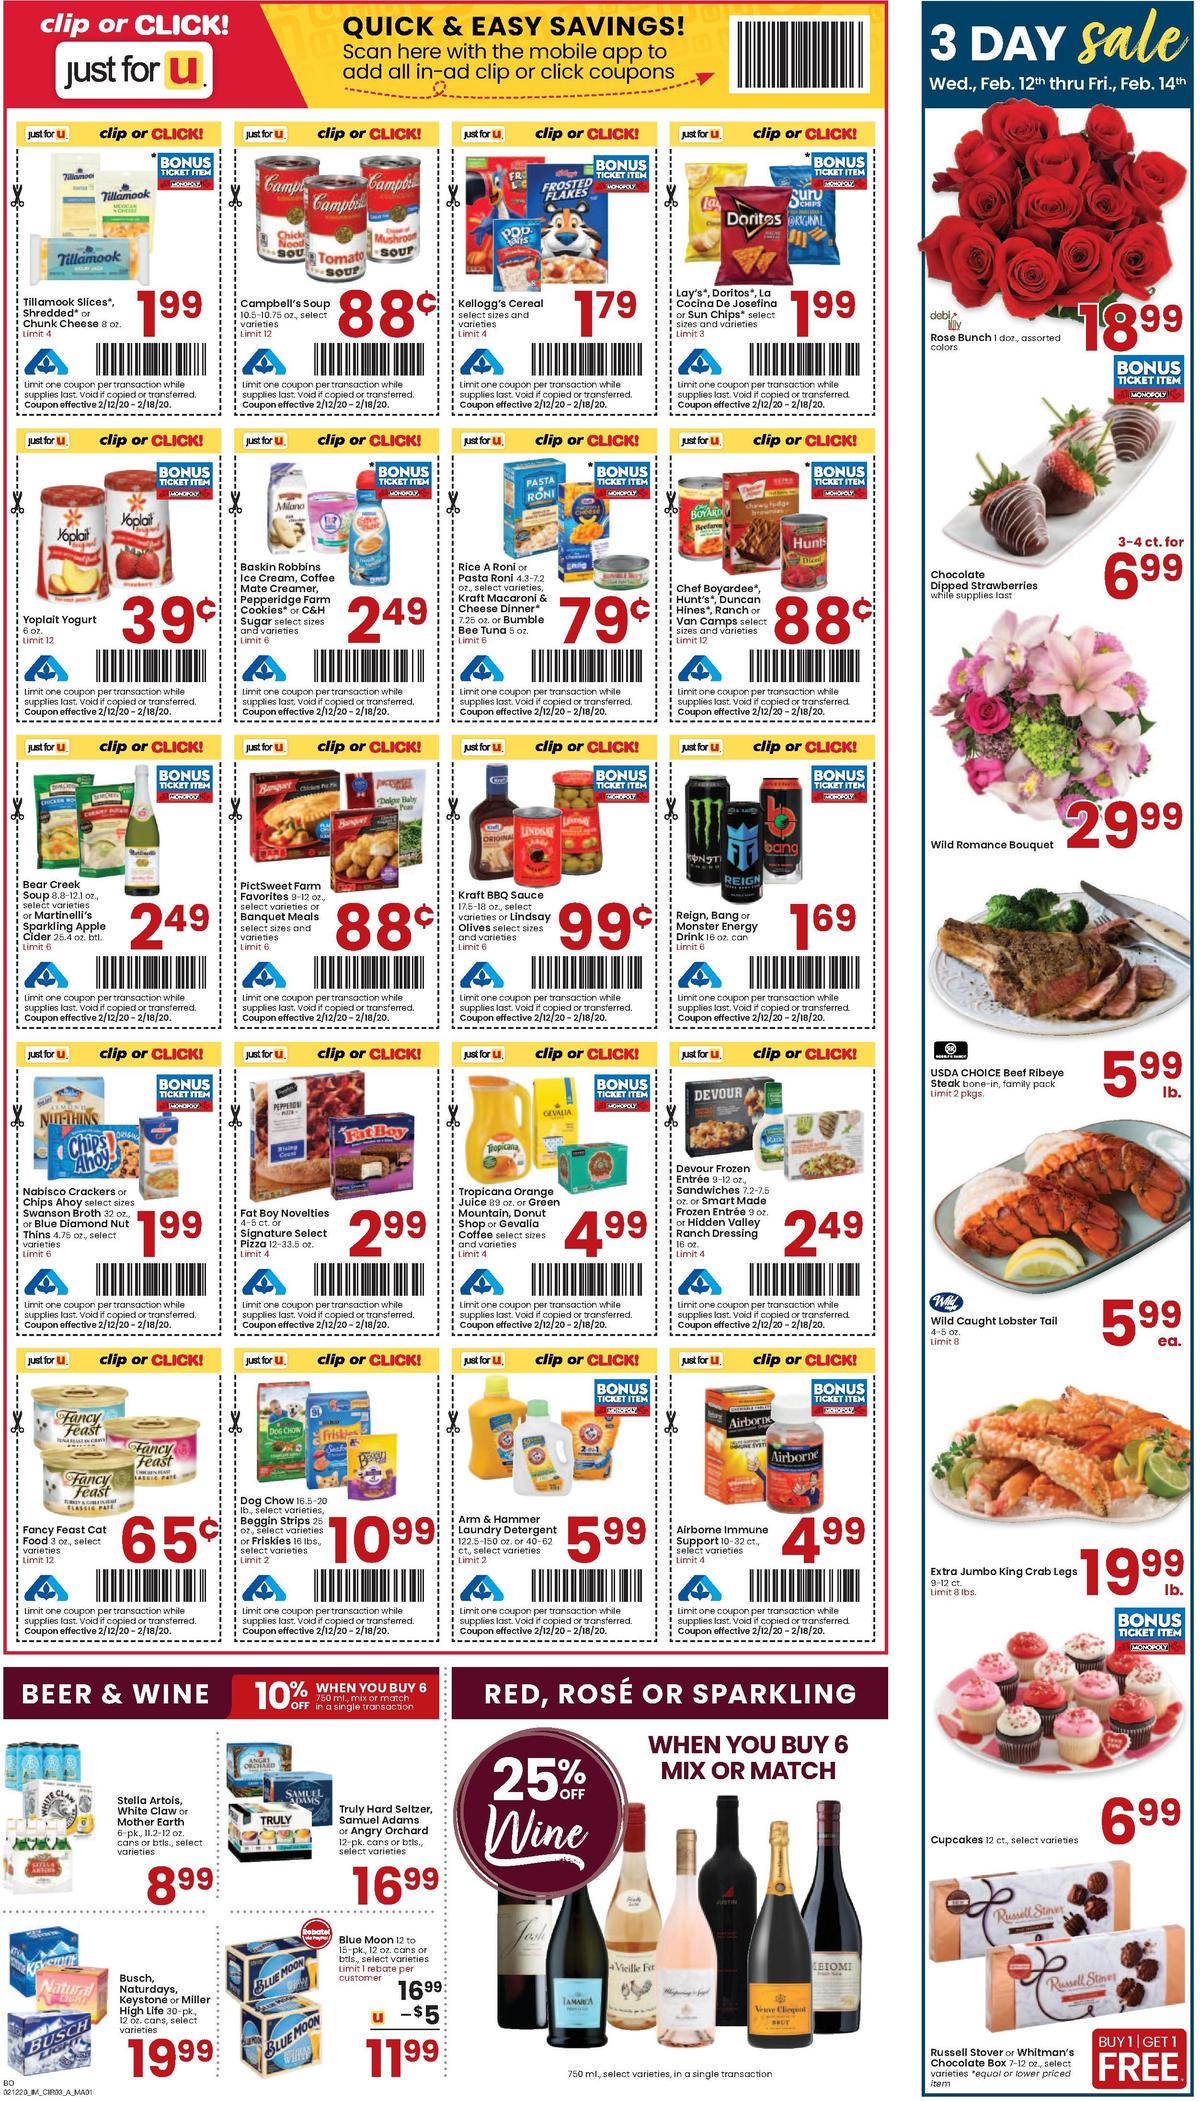 Albertsons Weekly Ad from February 12